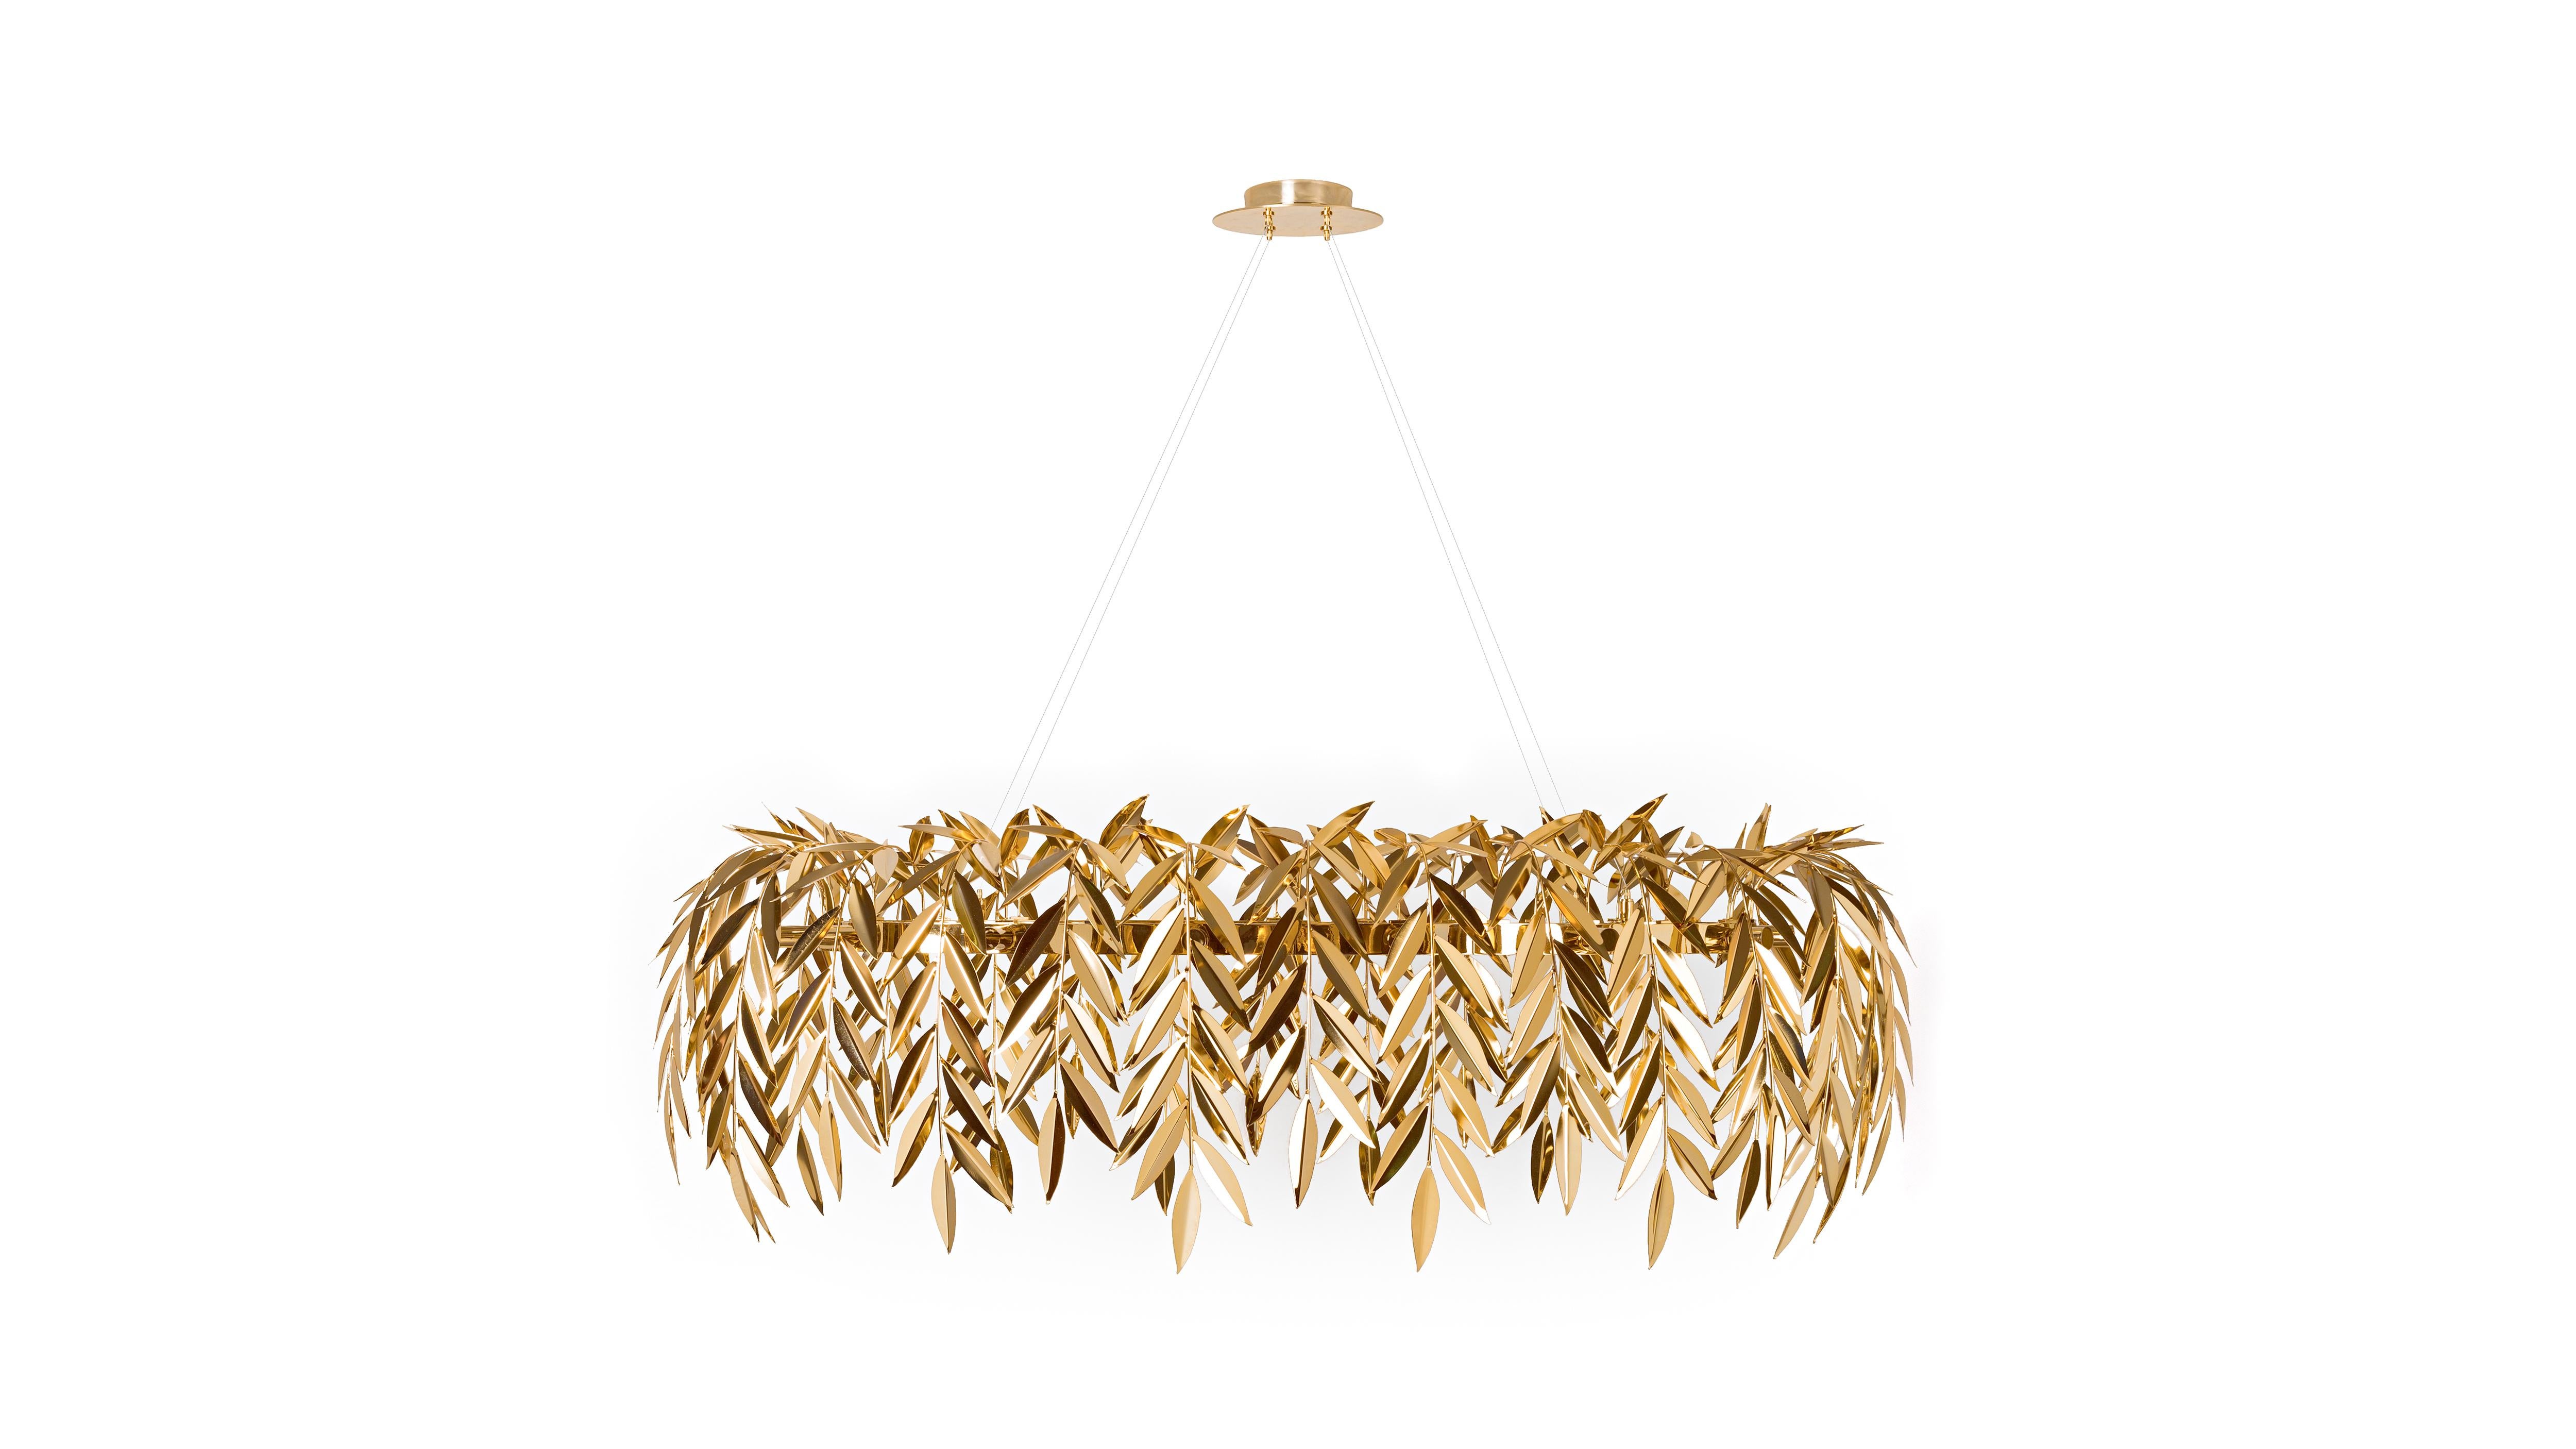 Gold Brass Azores Chandelier by InsidherLand
Dimensions: D 80 x W 130 x H 42 cm.
Materials: Polished brass with gold bath finish.
7 kg.

Born in the middle of the Atlantic Ocean, the archipelago of the Azores was formed by volcanic activity and